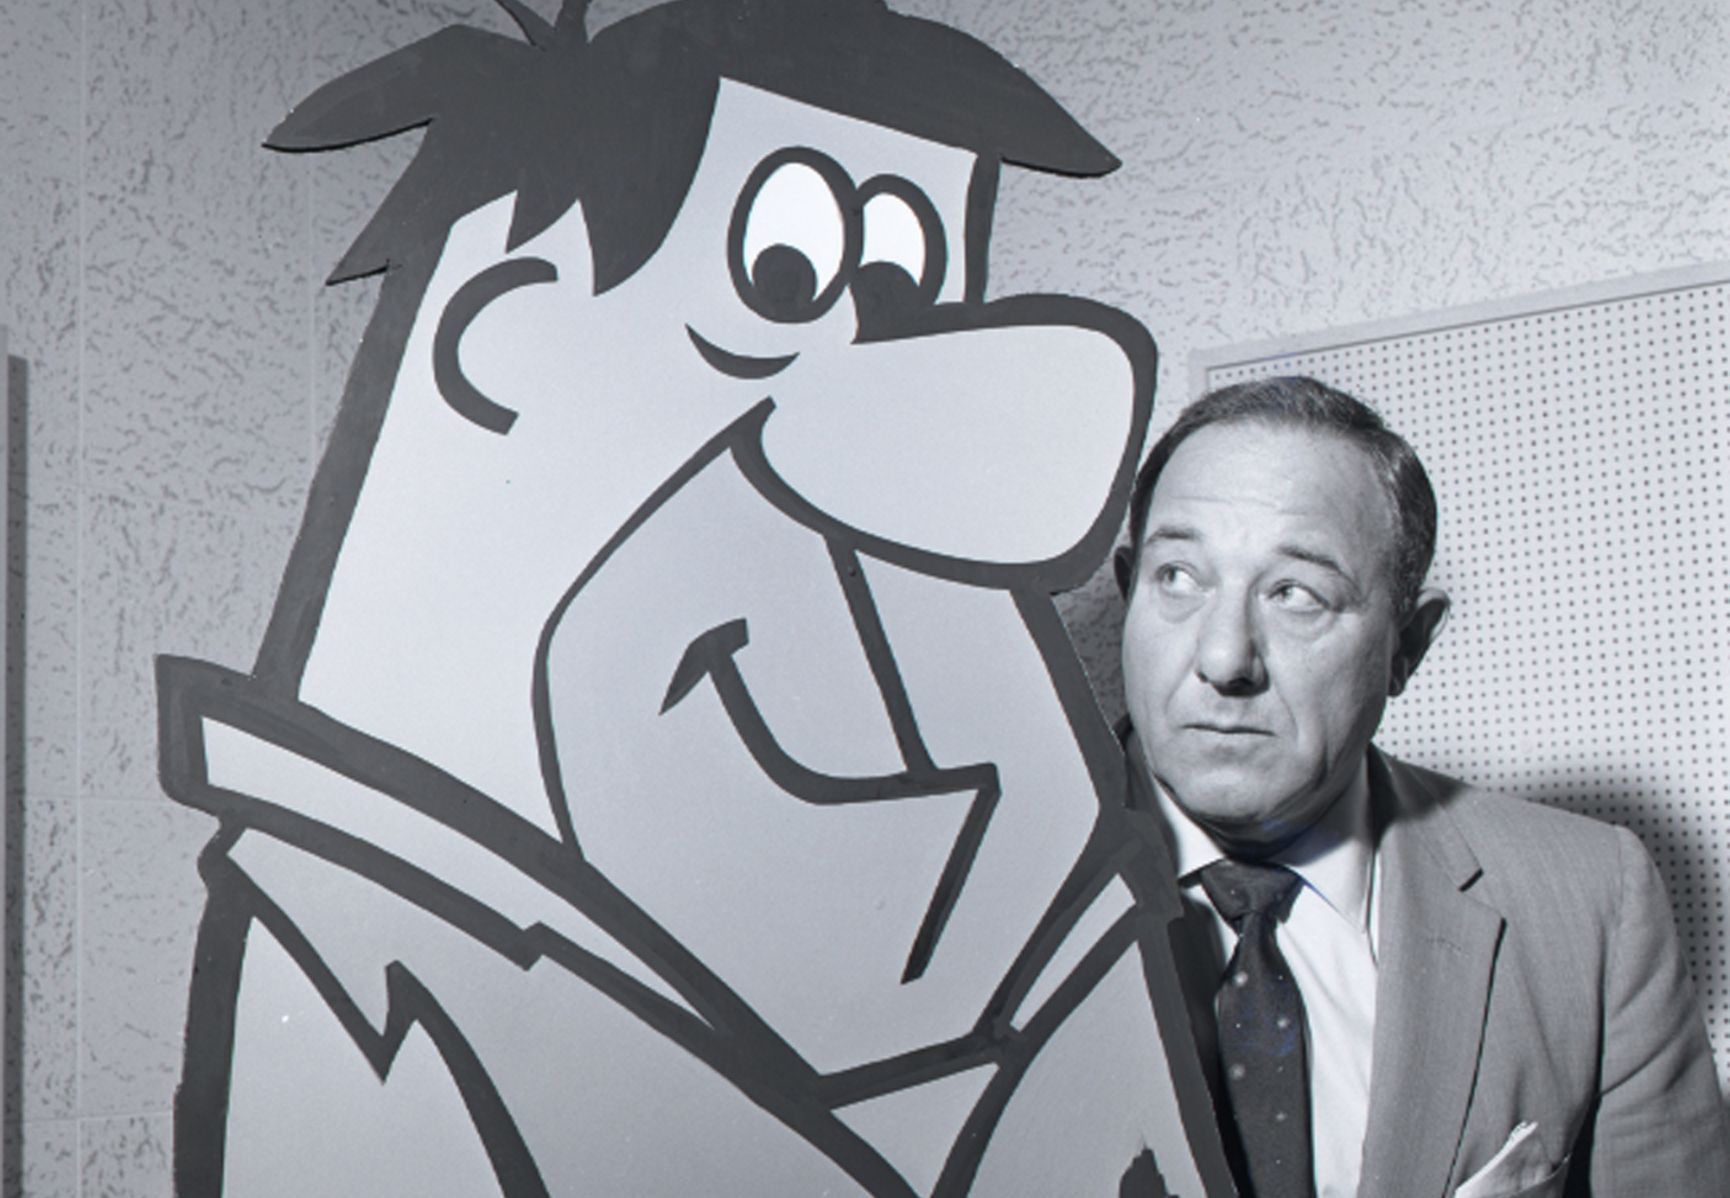 who is the voice of fred flintstone